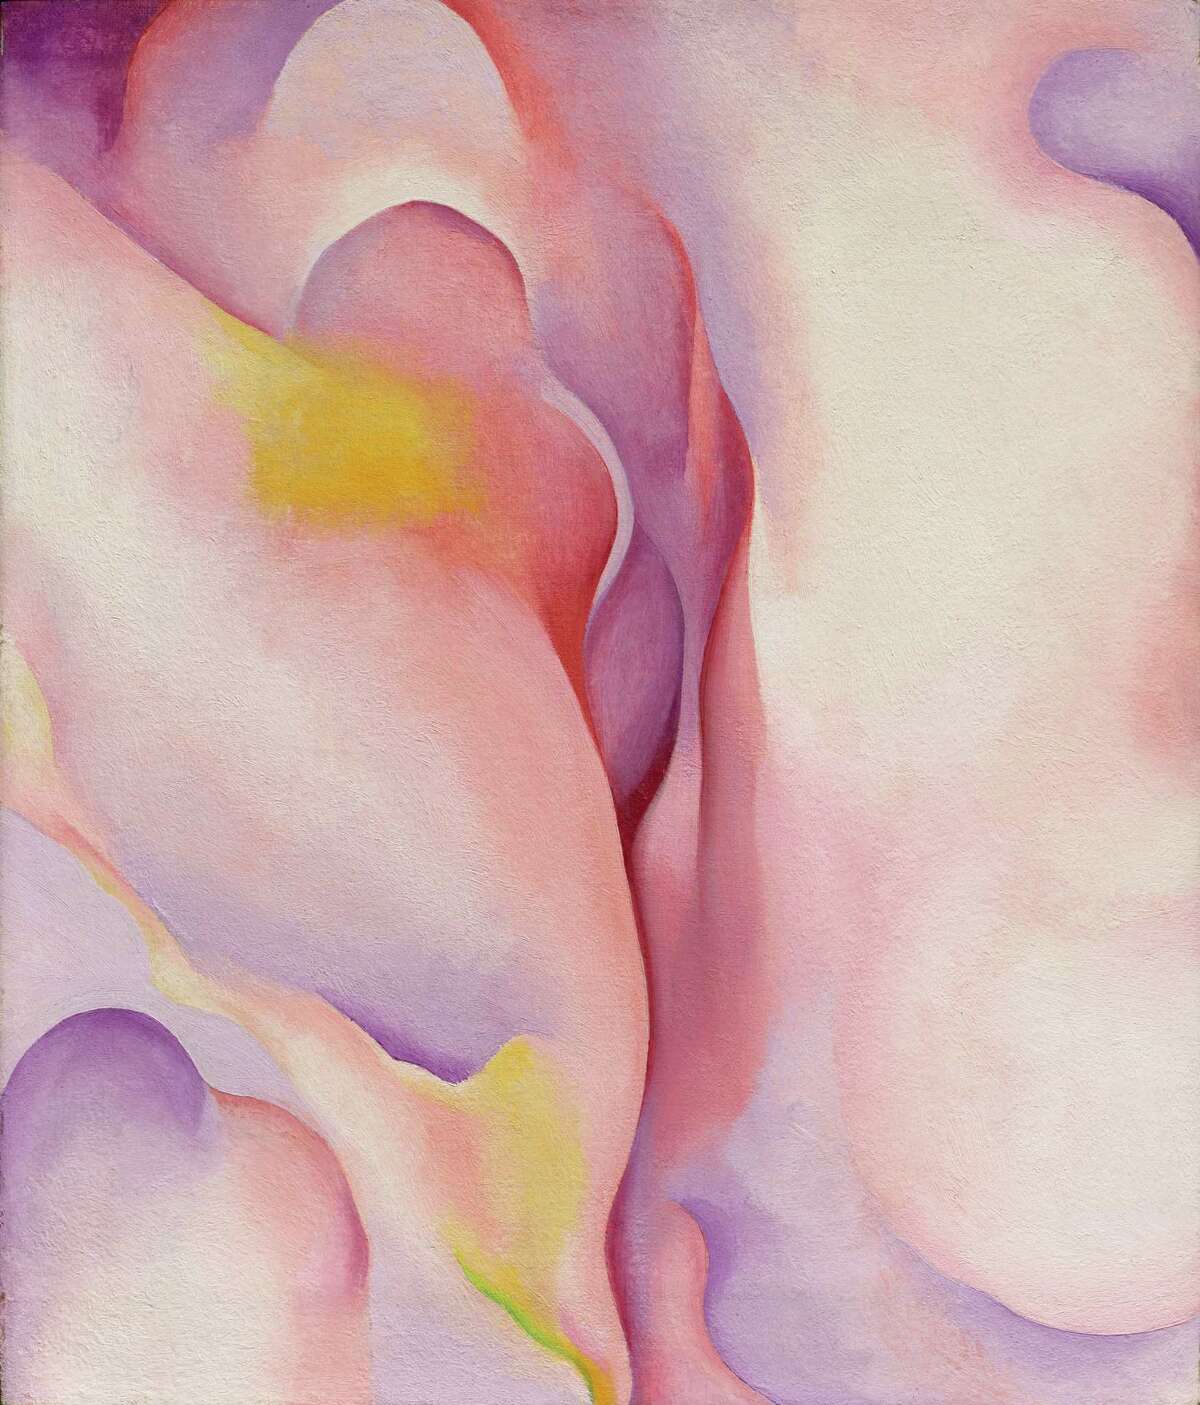 "From Pink Shell," by Georgia O'Keeffe (1931)